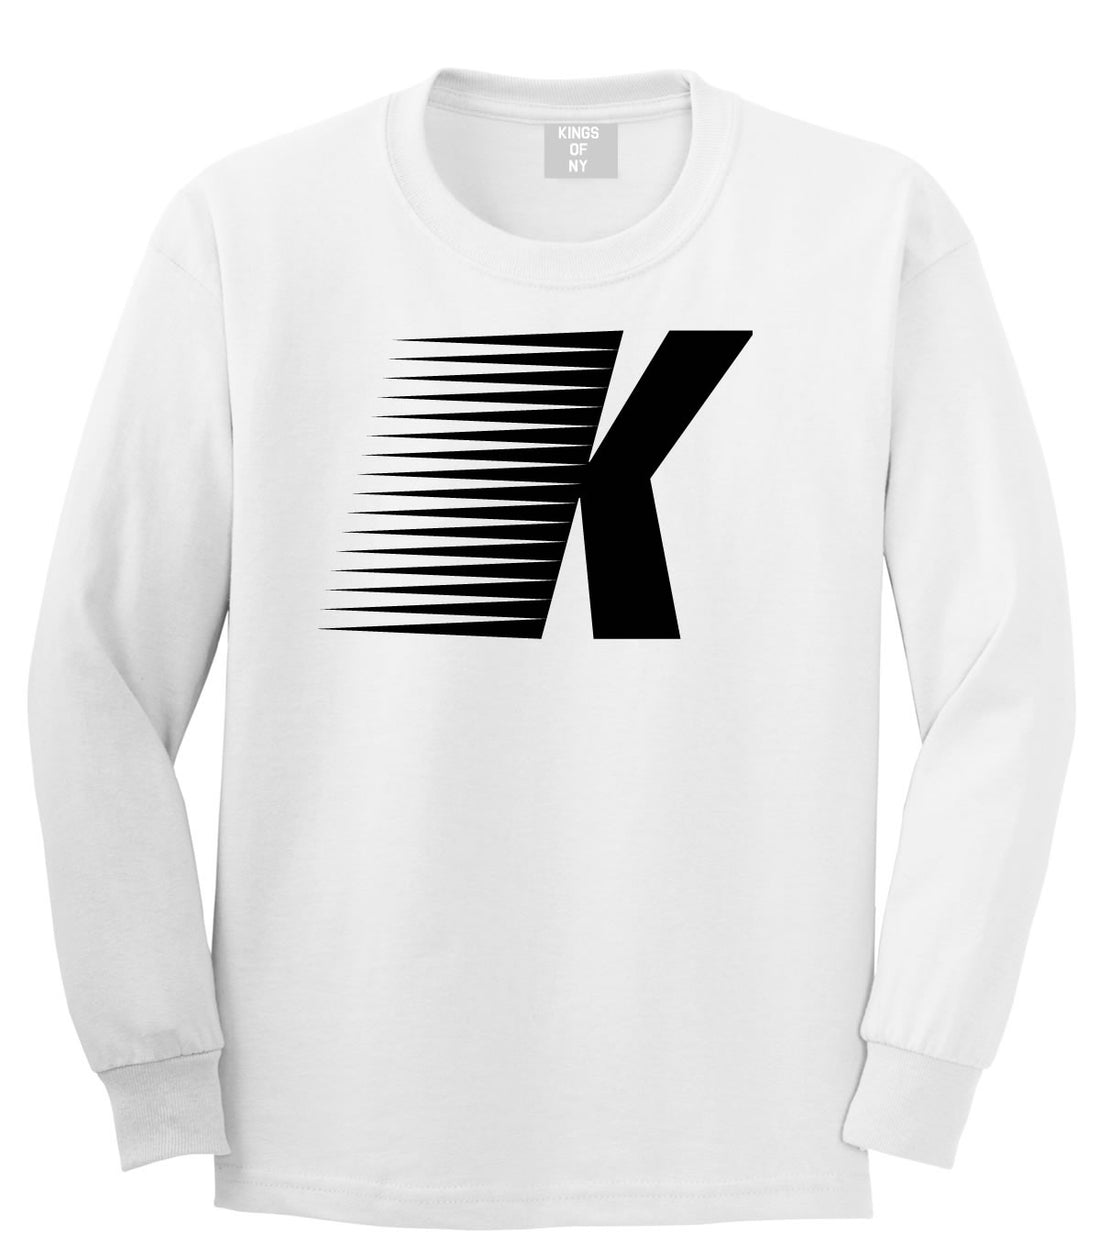 Flash K Running Fitness Style Long Sleeve T-Shirt in White By Kings Of NY